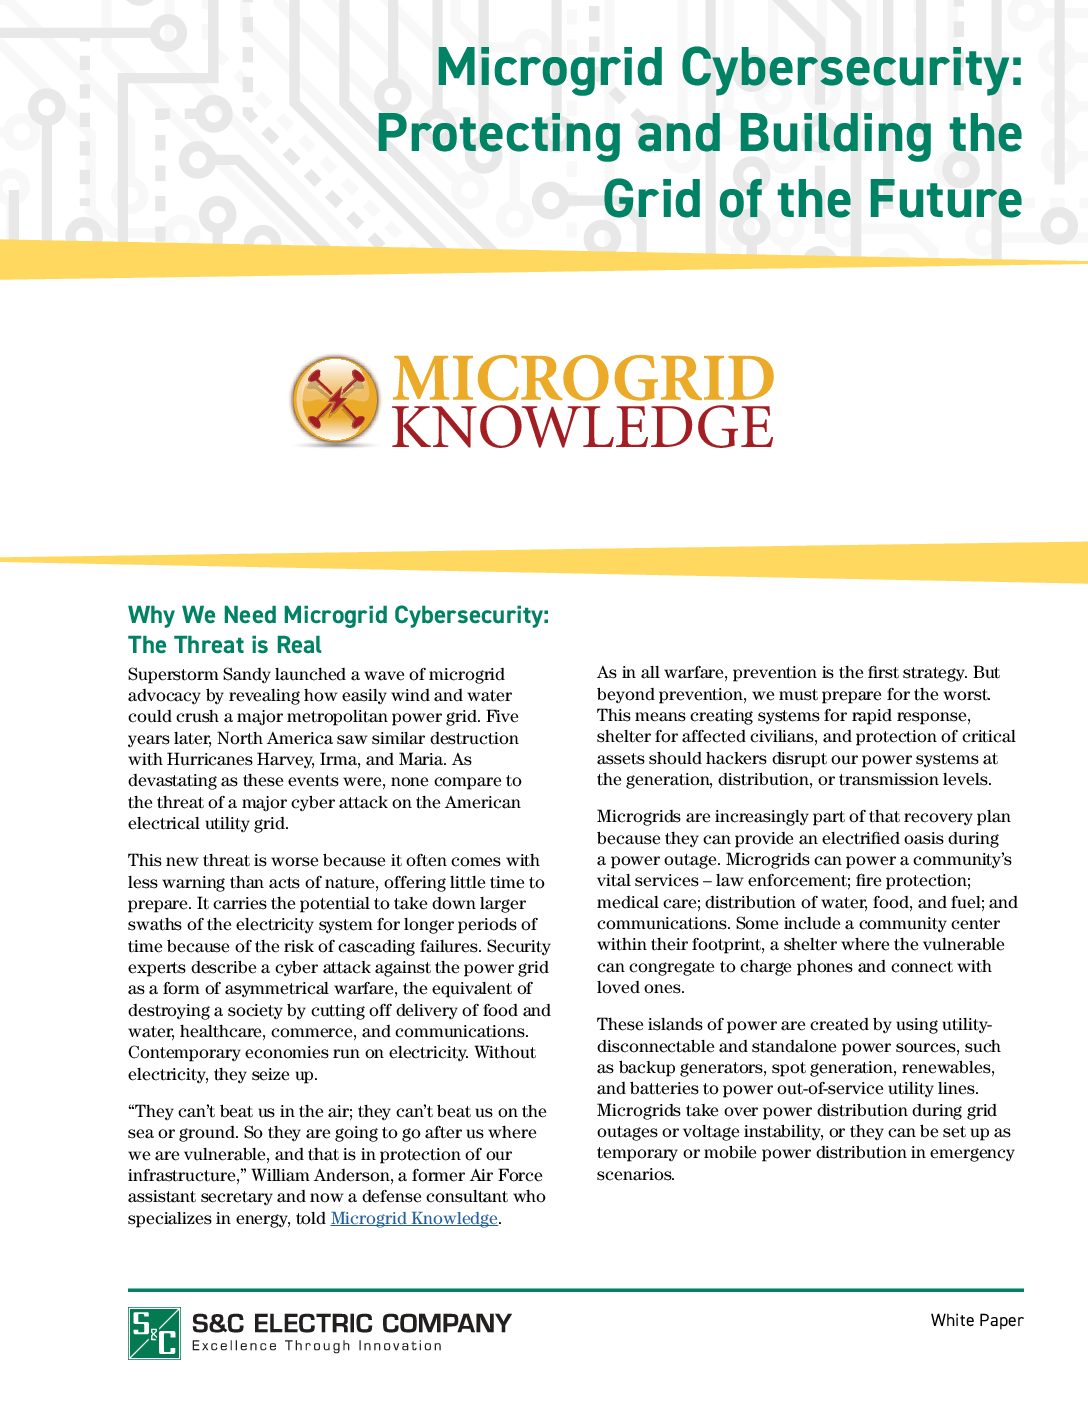 Microgrid Cybersecurity: Protecting and Building the Grid of the Future